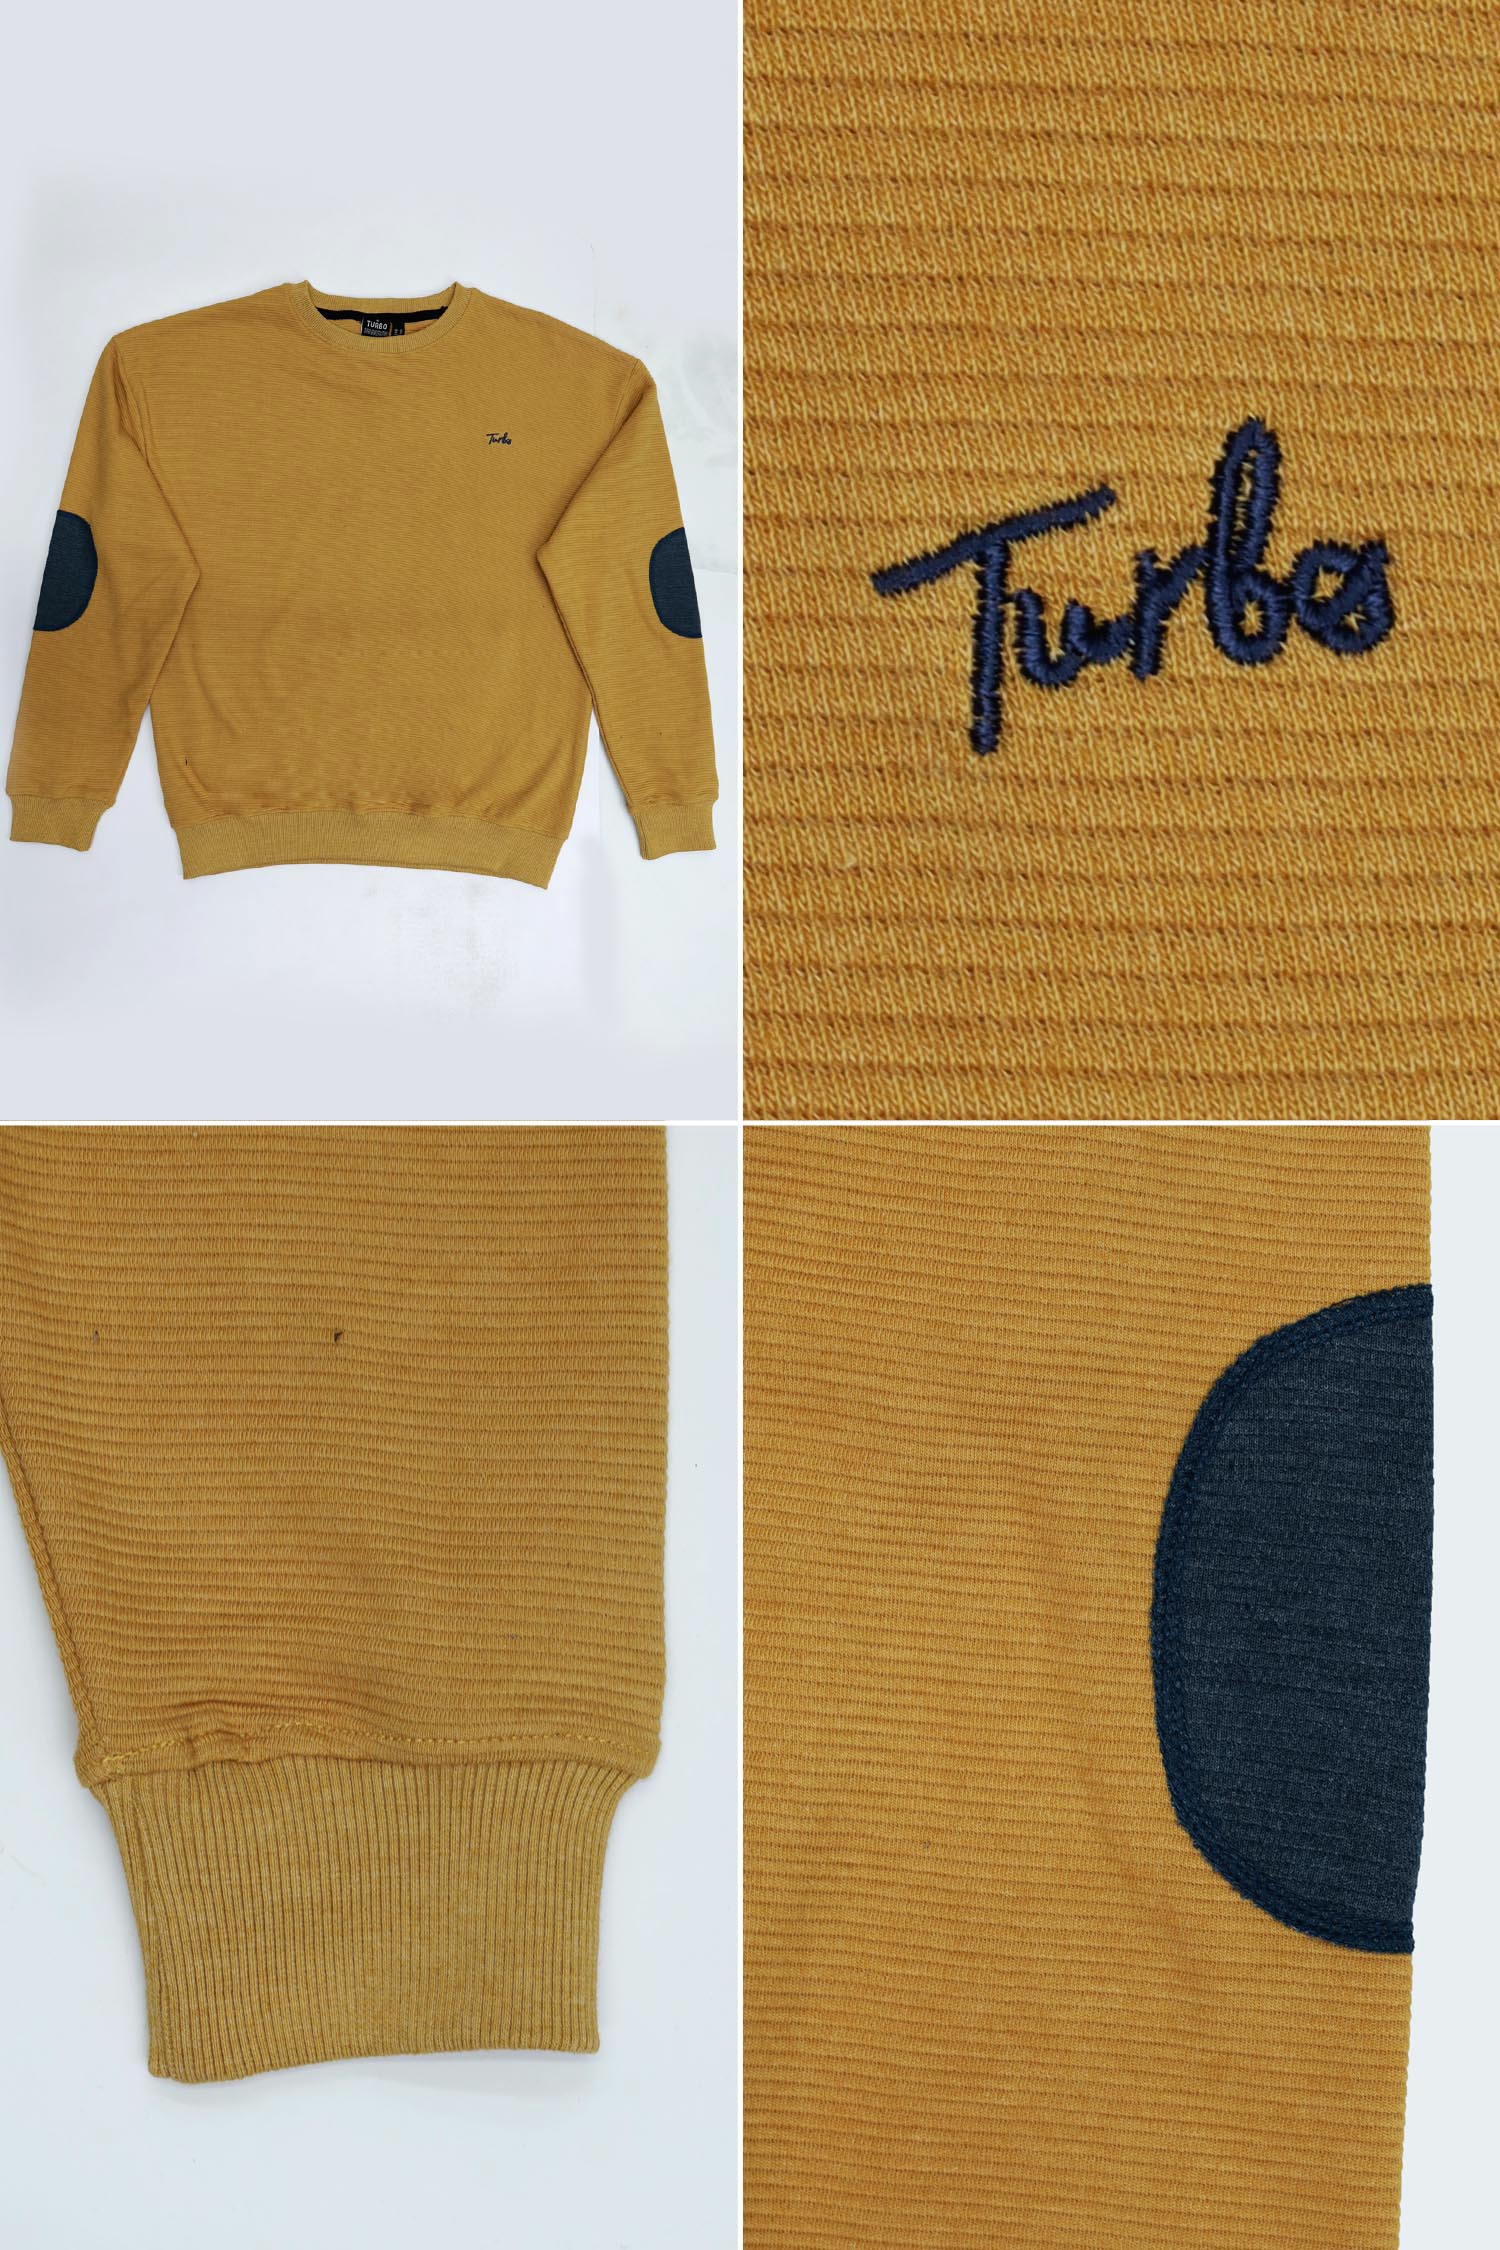 Turbo Embroided Men's Over Size Sweatshirt In Light Yellow